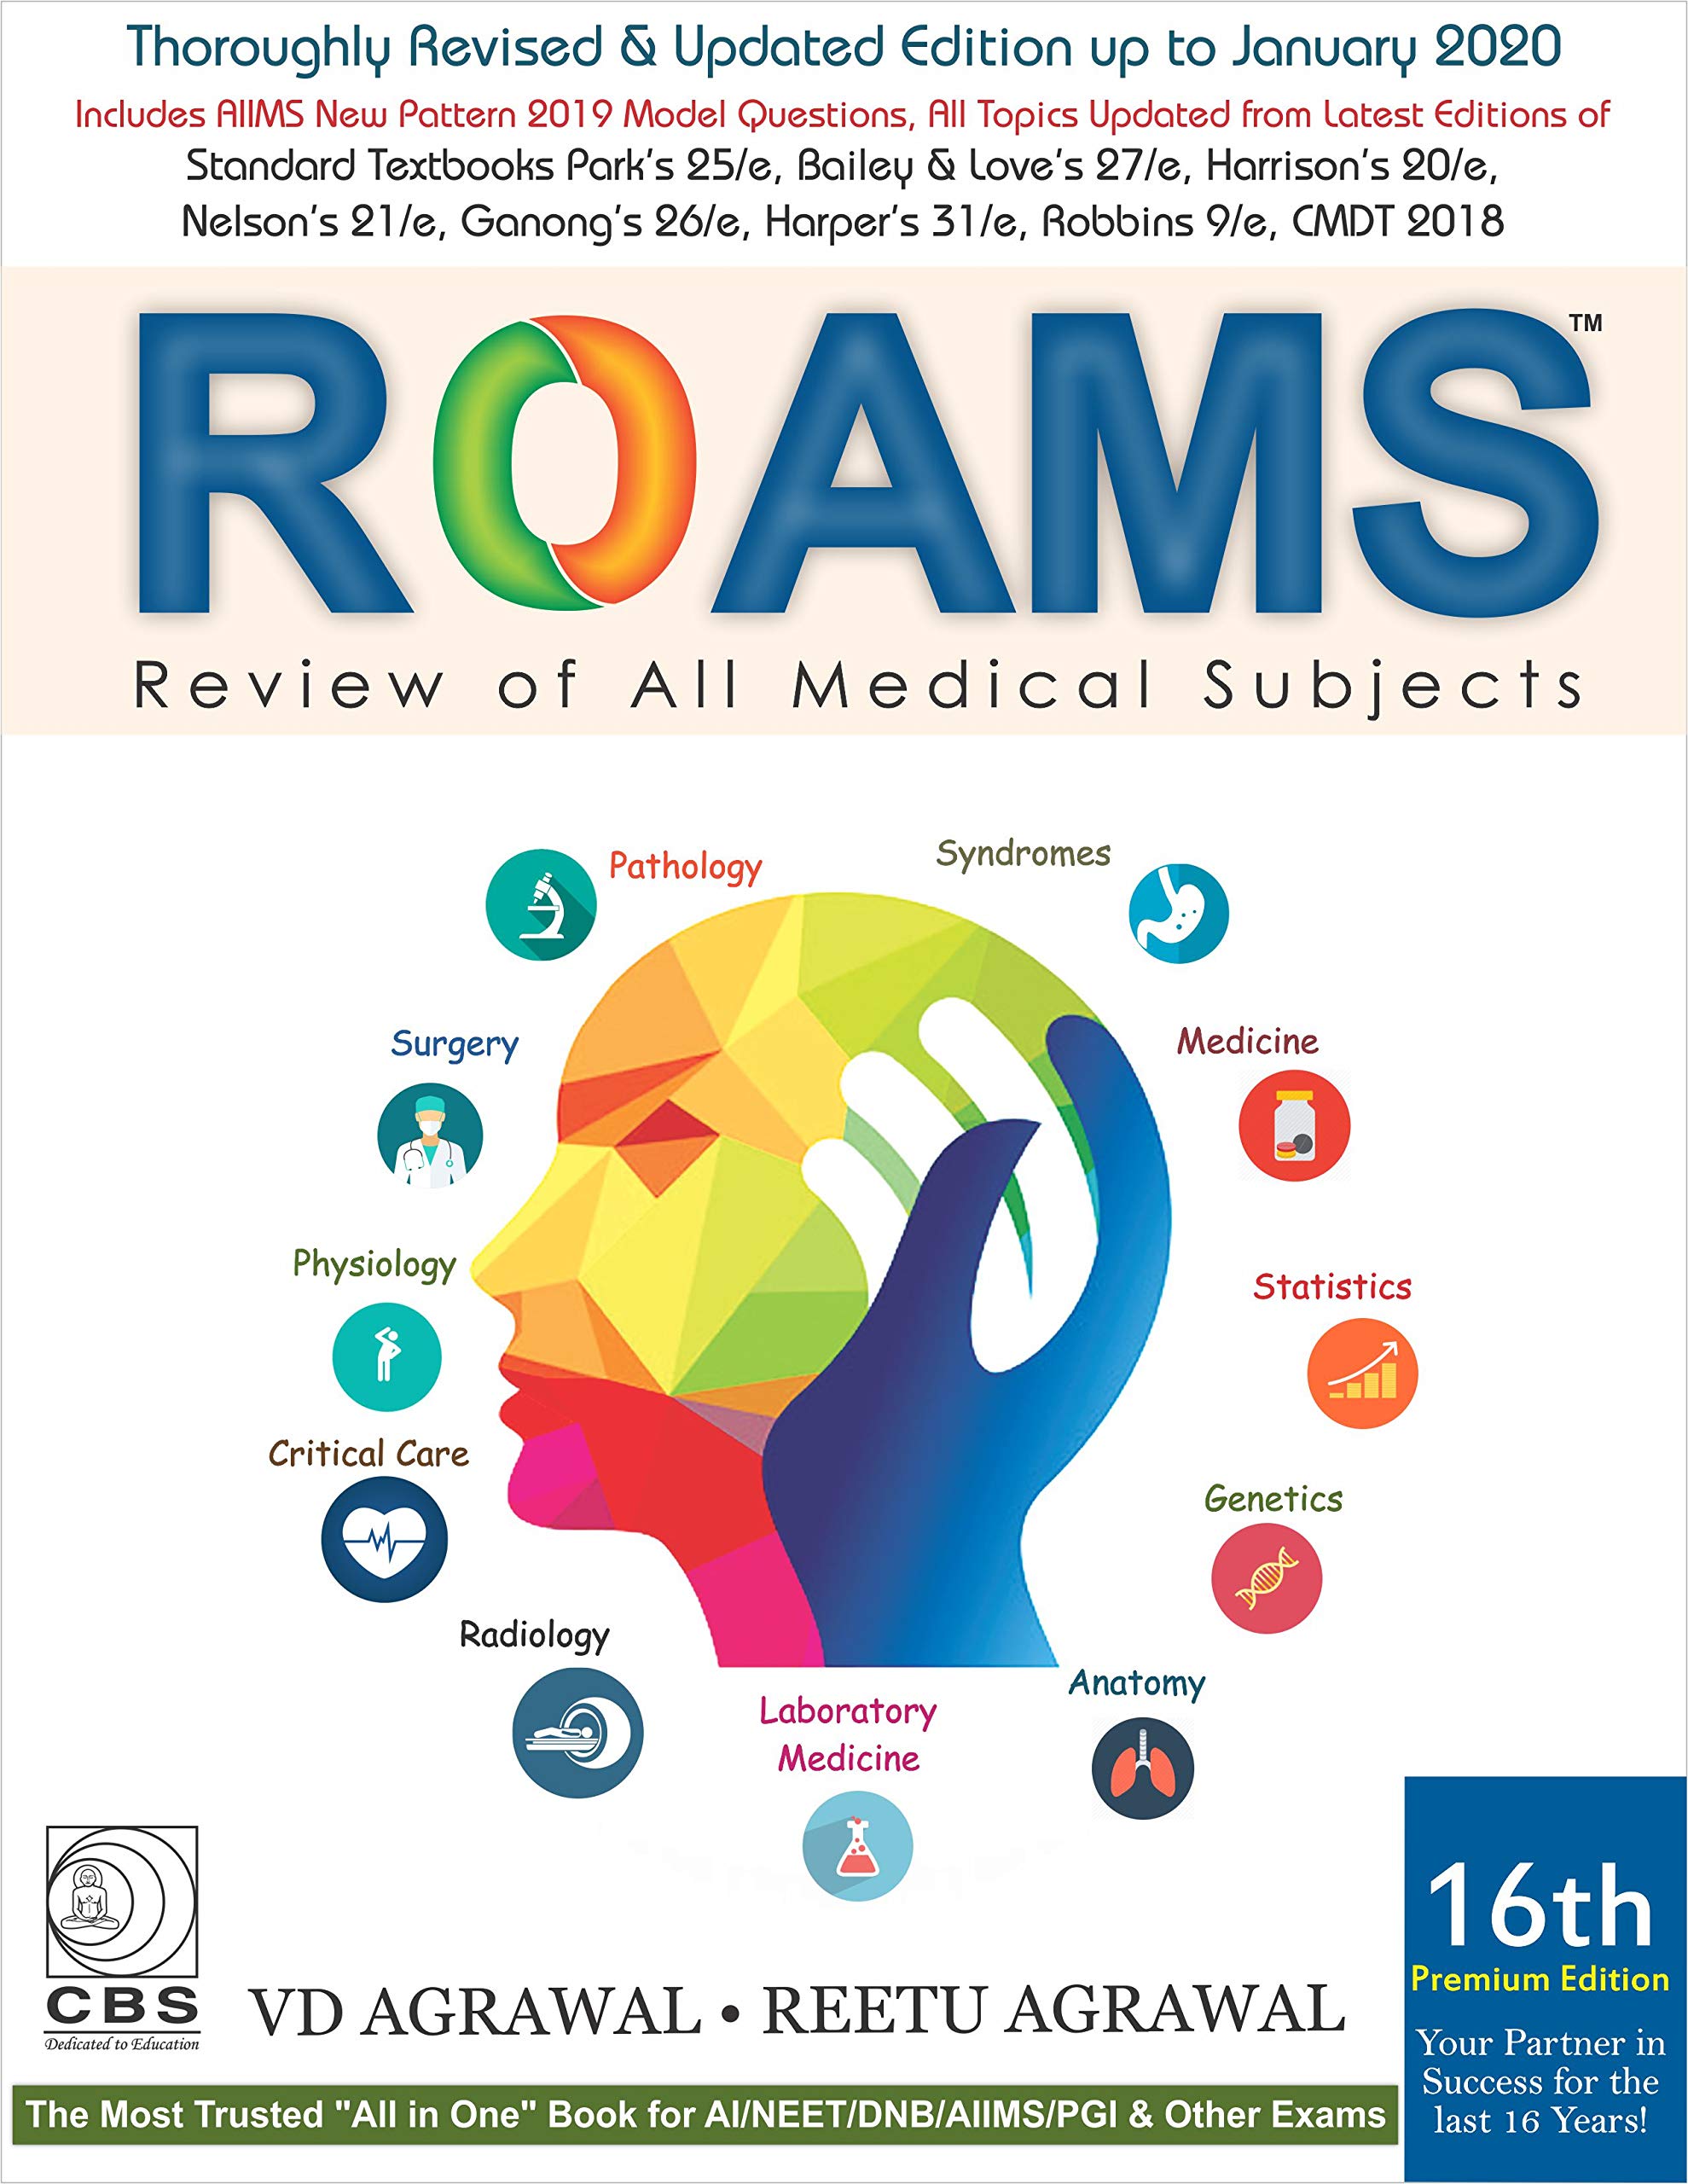 roams-review-of-all-medical-subjects